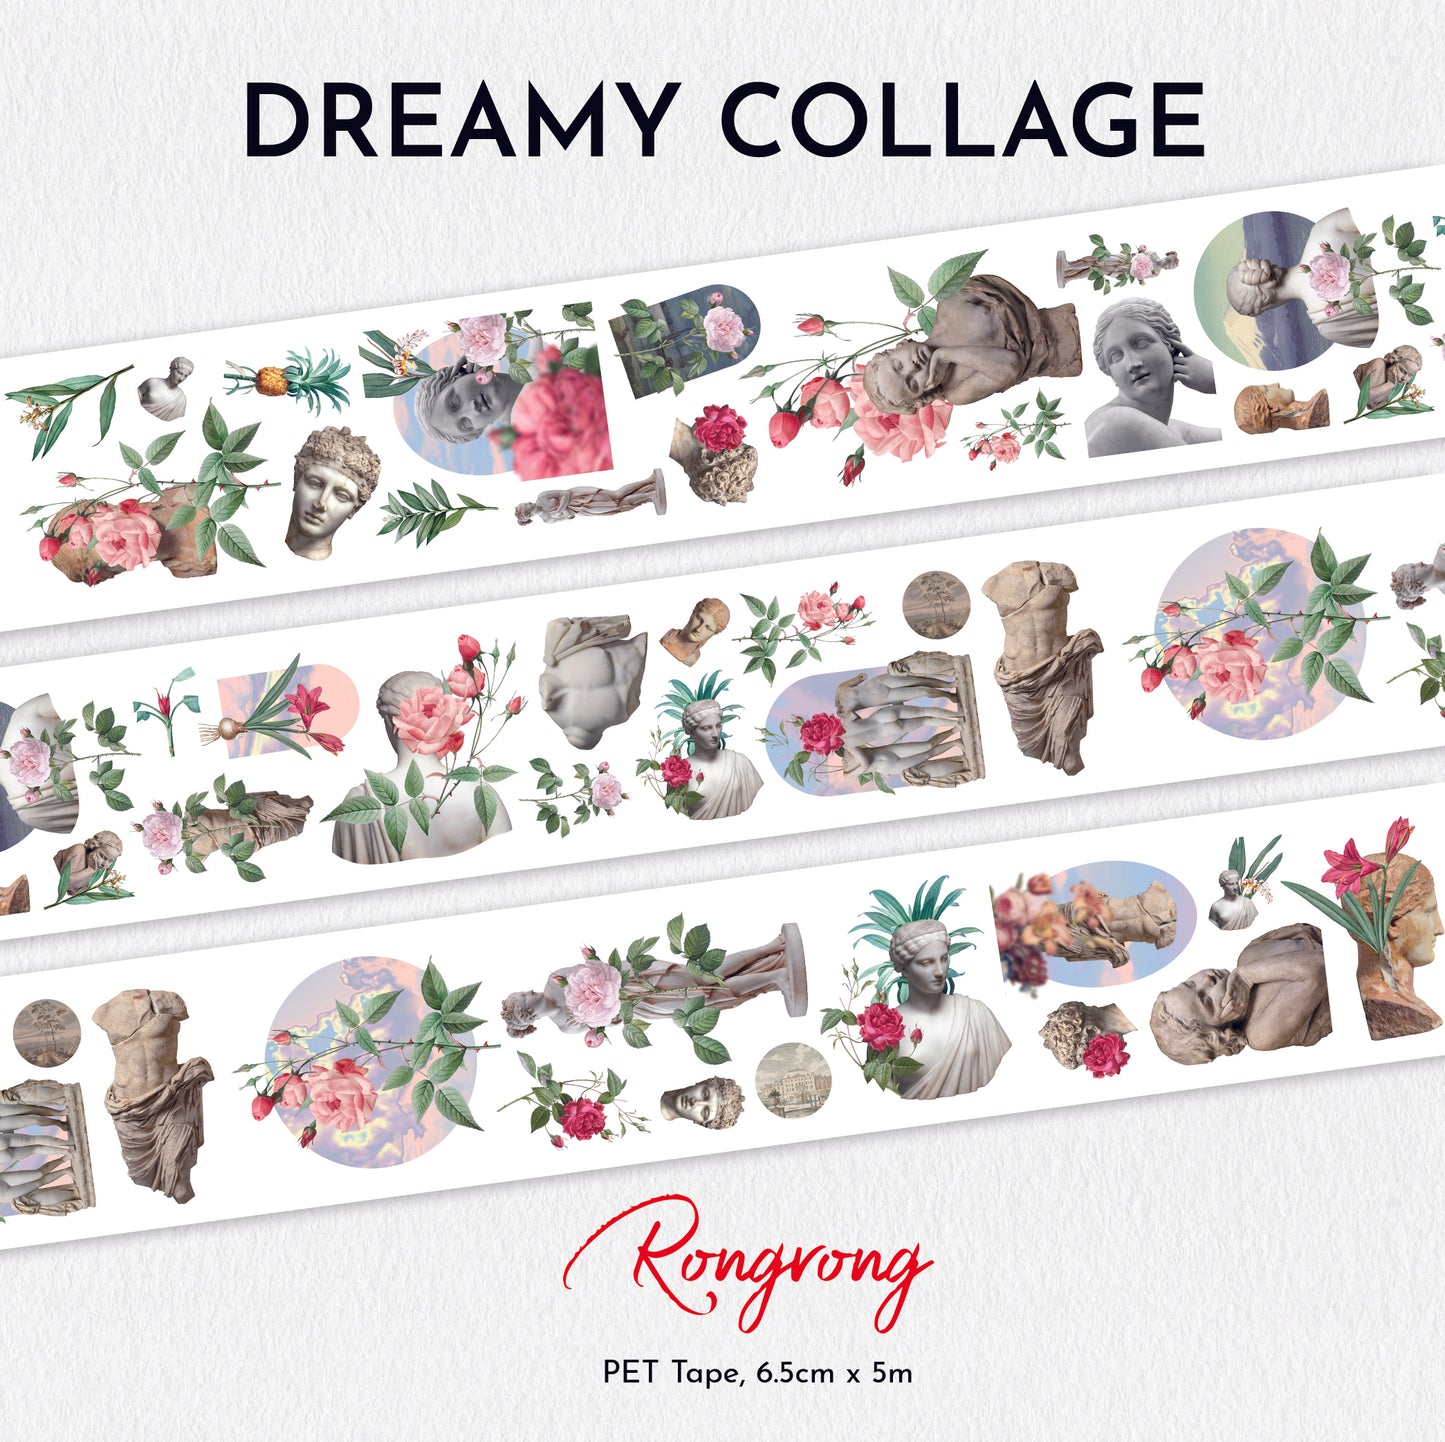 Dreamy Collage PET Tape [December] (Set of 6)